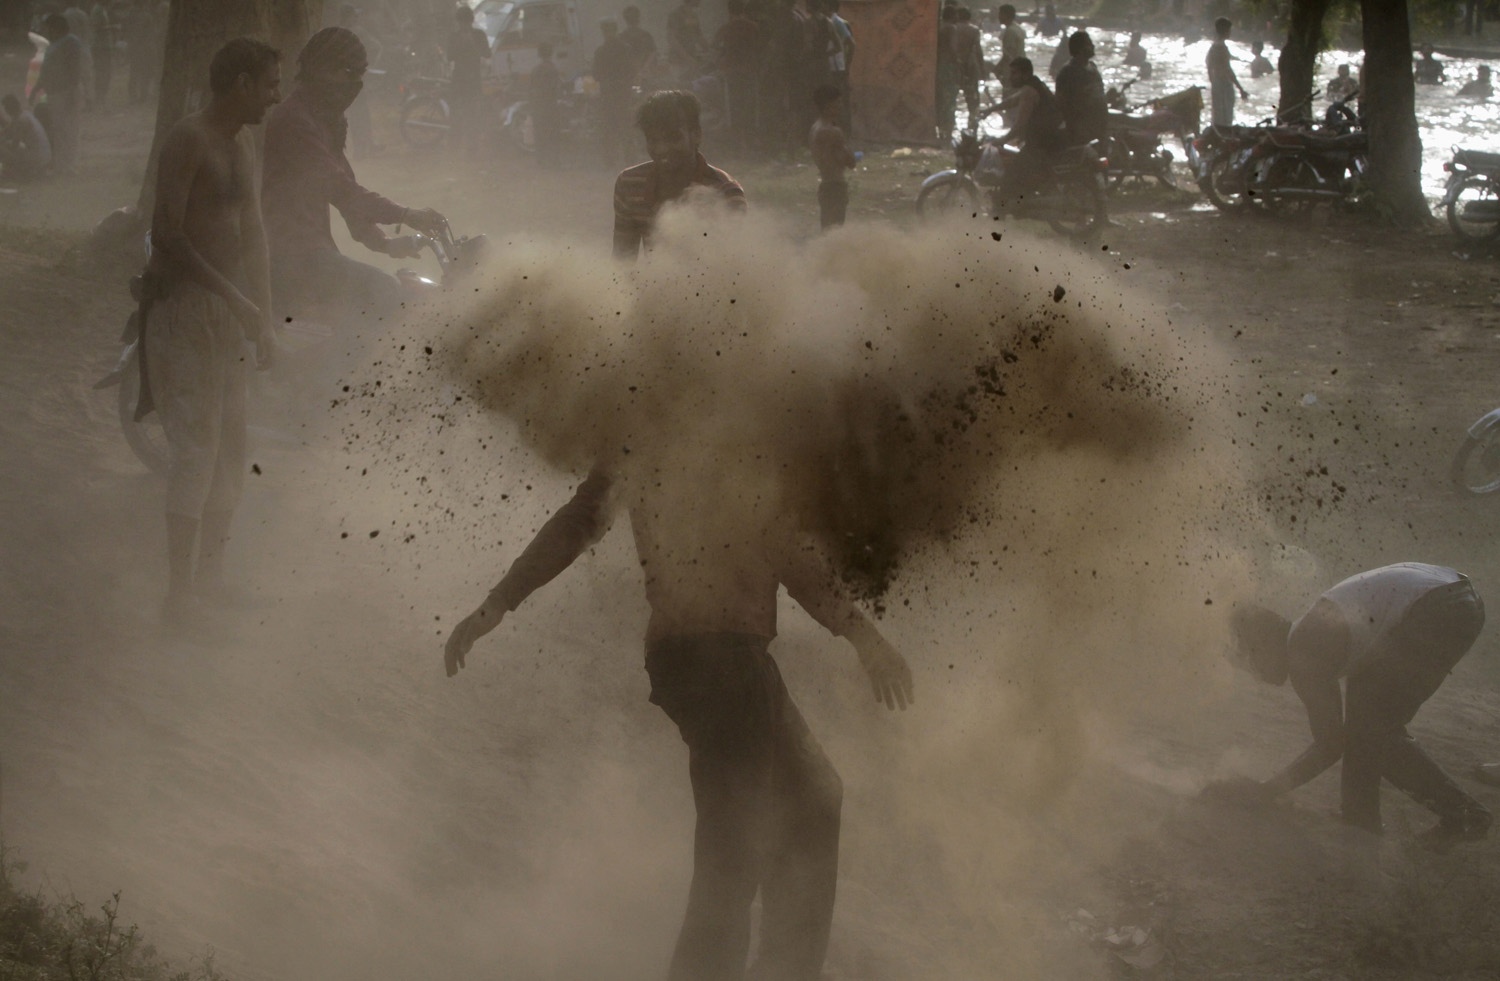 Locals play with dirt before a dip to cool off in a nearby canal on a hot day in Lahore, Pakistan on  June 8, 2014.